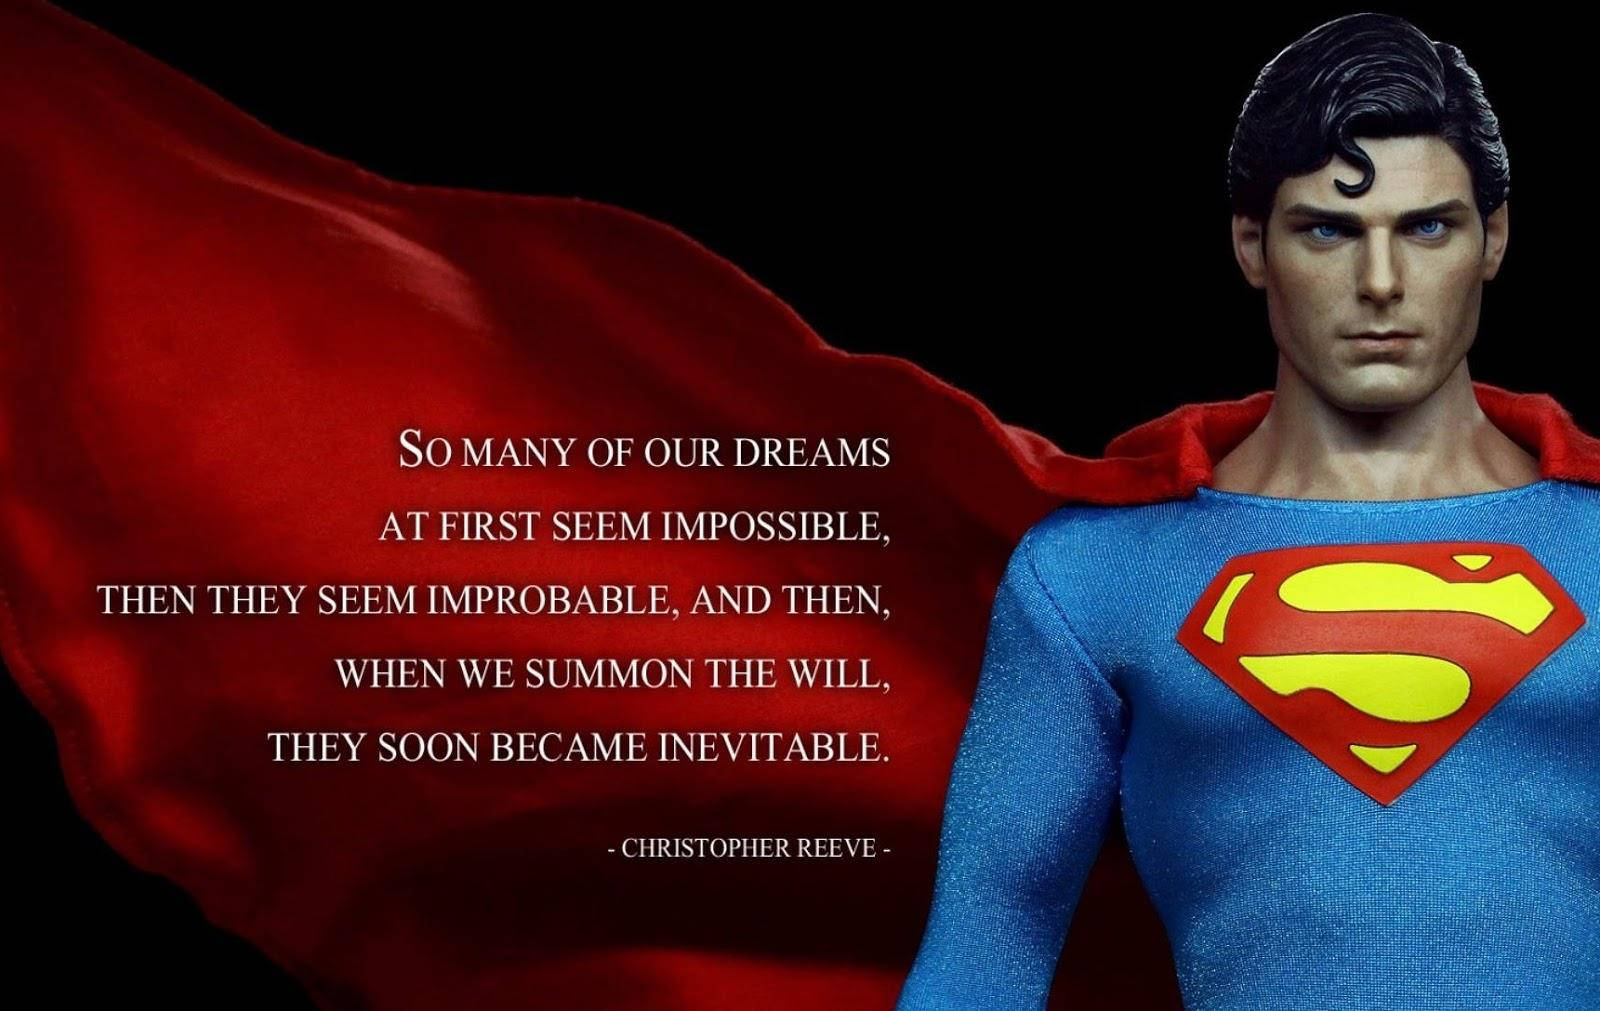 Christopher Reeve Dream Quote Background